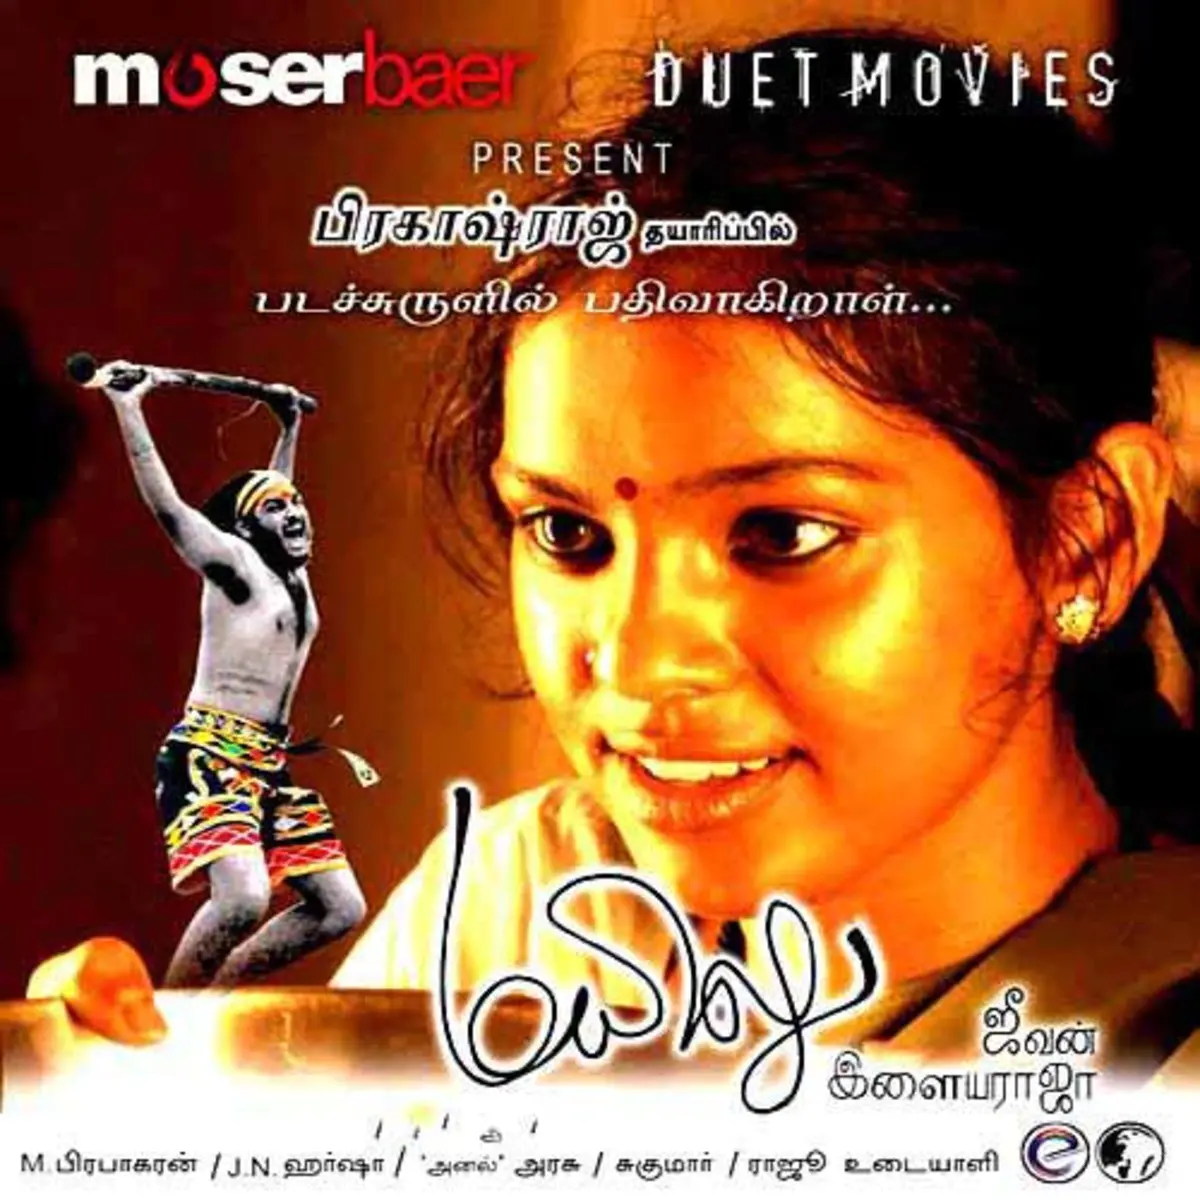 Bodhidharma Xx Video - Mayilu Tamil Movie Video Song Download Yuvsoft 2d To 3d Suite ...